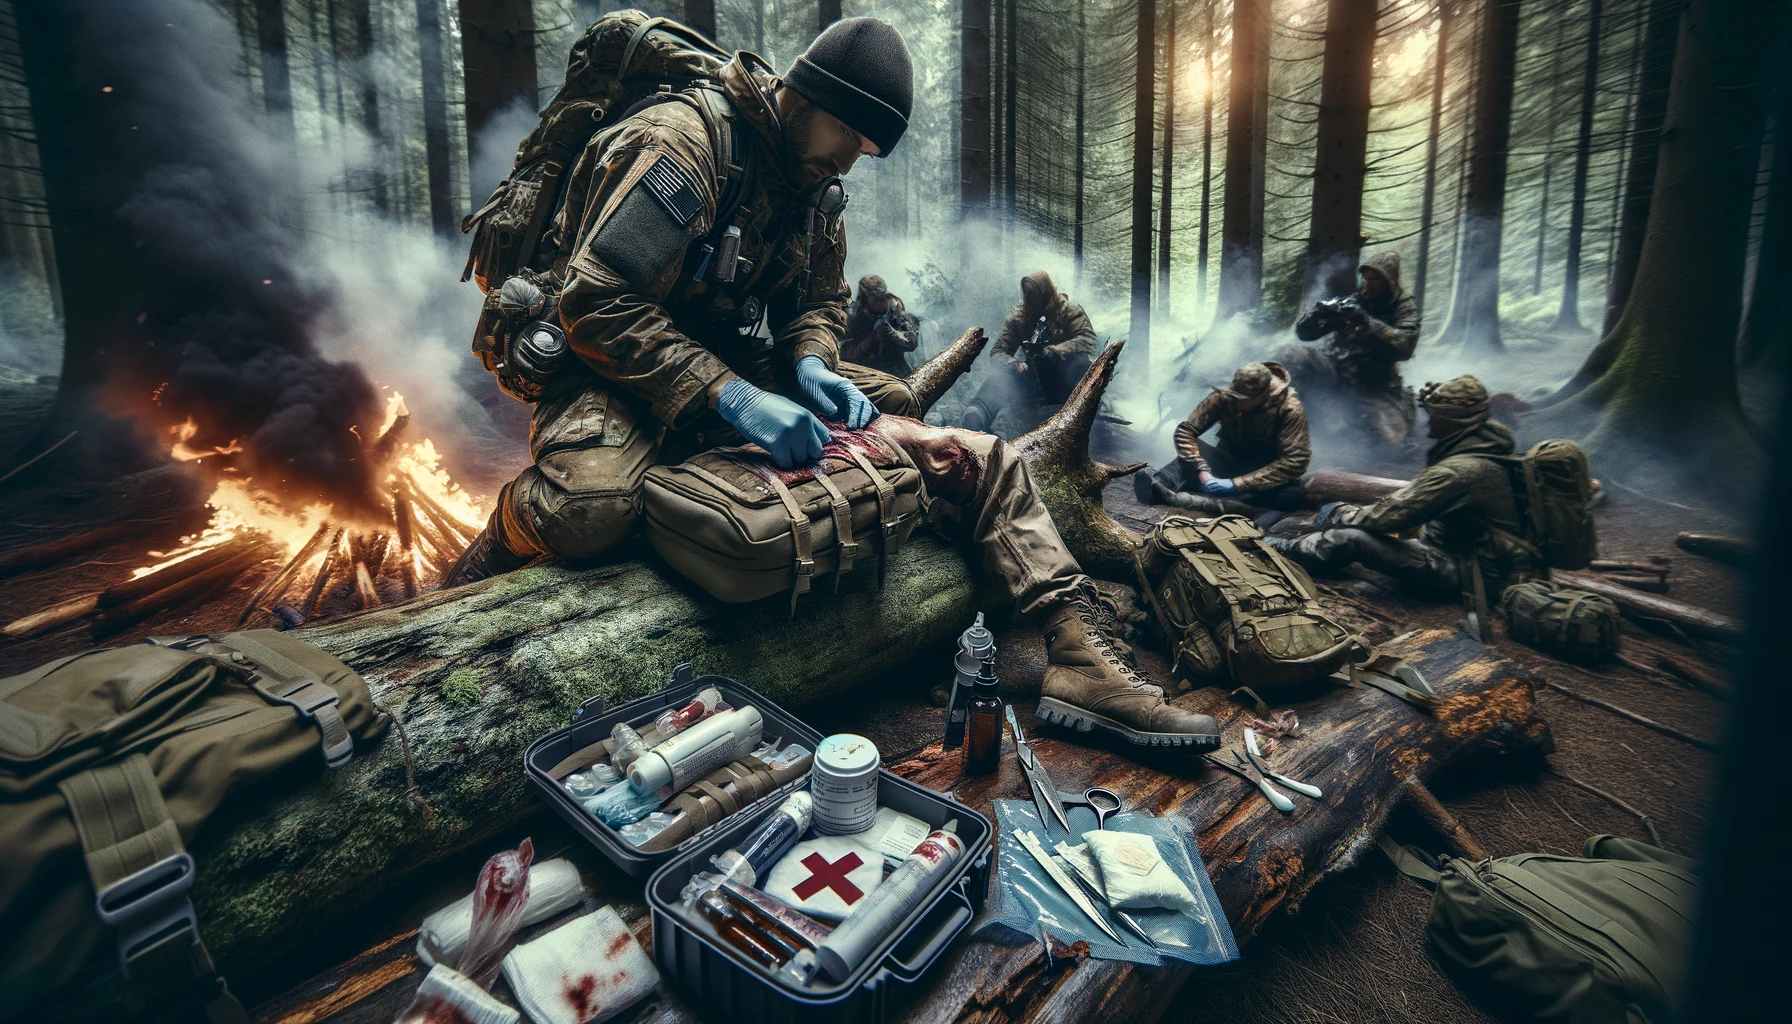 Dynamic illustration of first aid and emergency preparedness in remote settings, showing individuals applying first aid treatments and preparing medical kits in a wilderness environment, embodying self-sufficiency and readiness, appealing to preppers